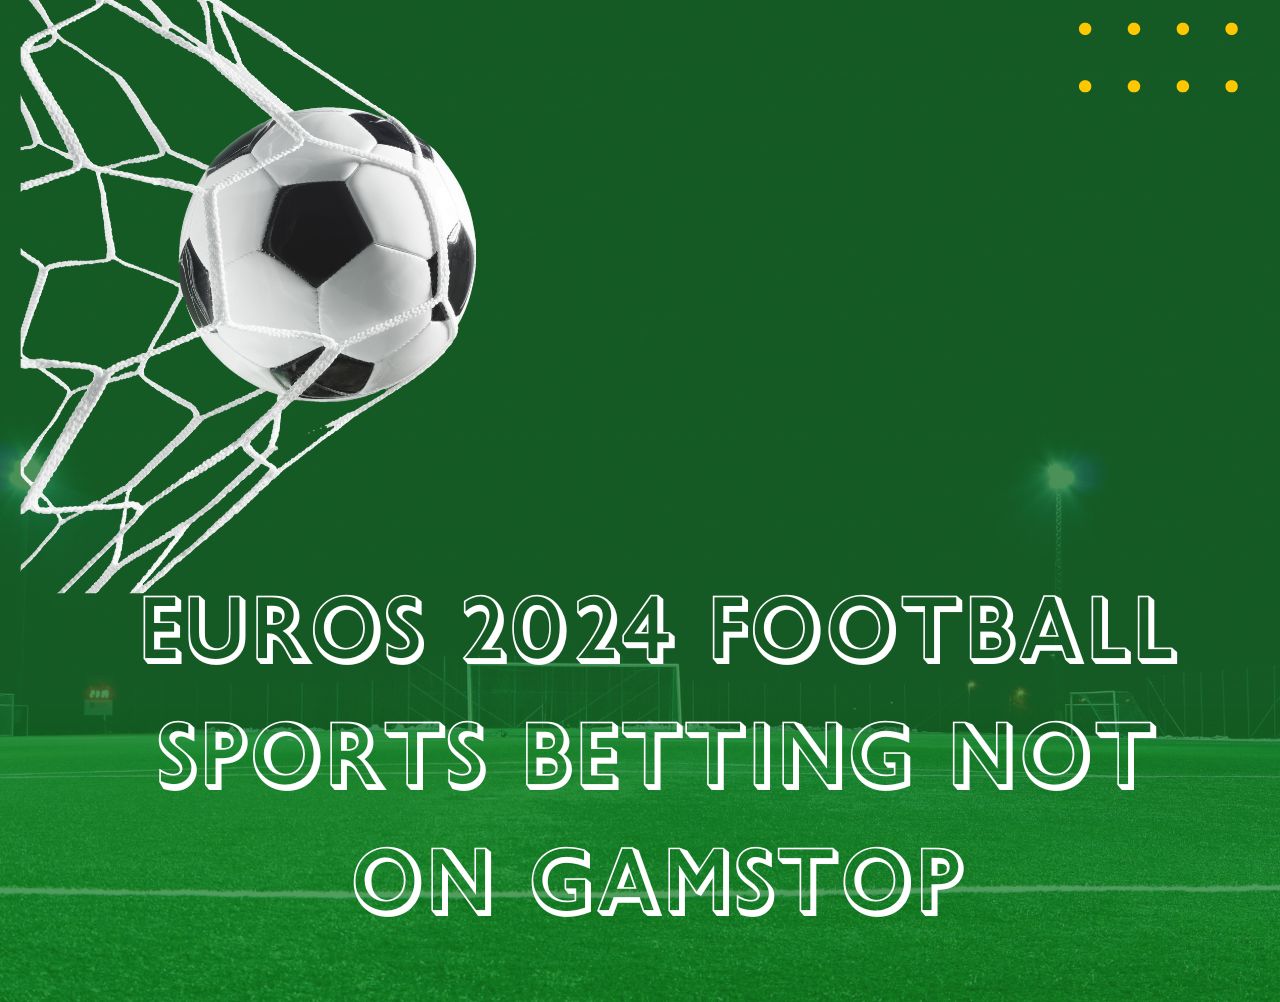 Euros 2024 Football Sports Betting Not On Gamstop